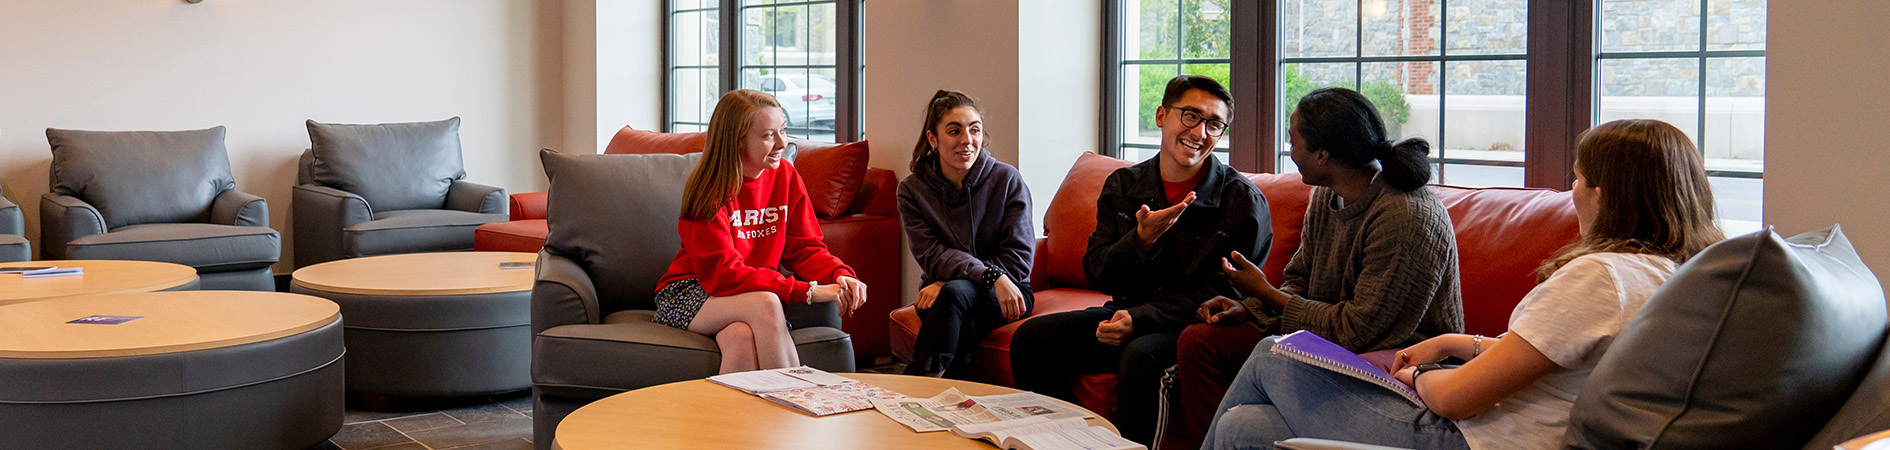 Photo of students talking in residence hall common area